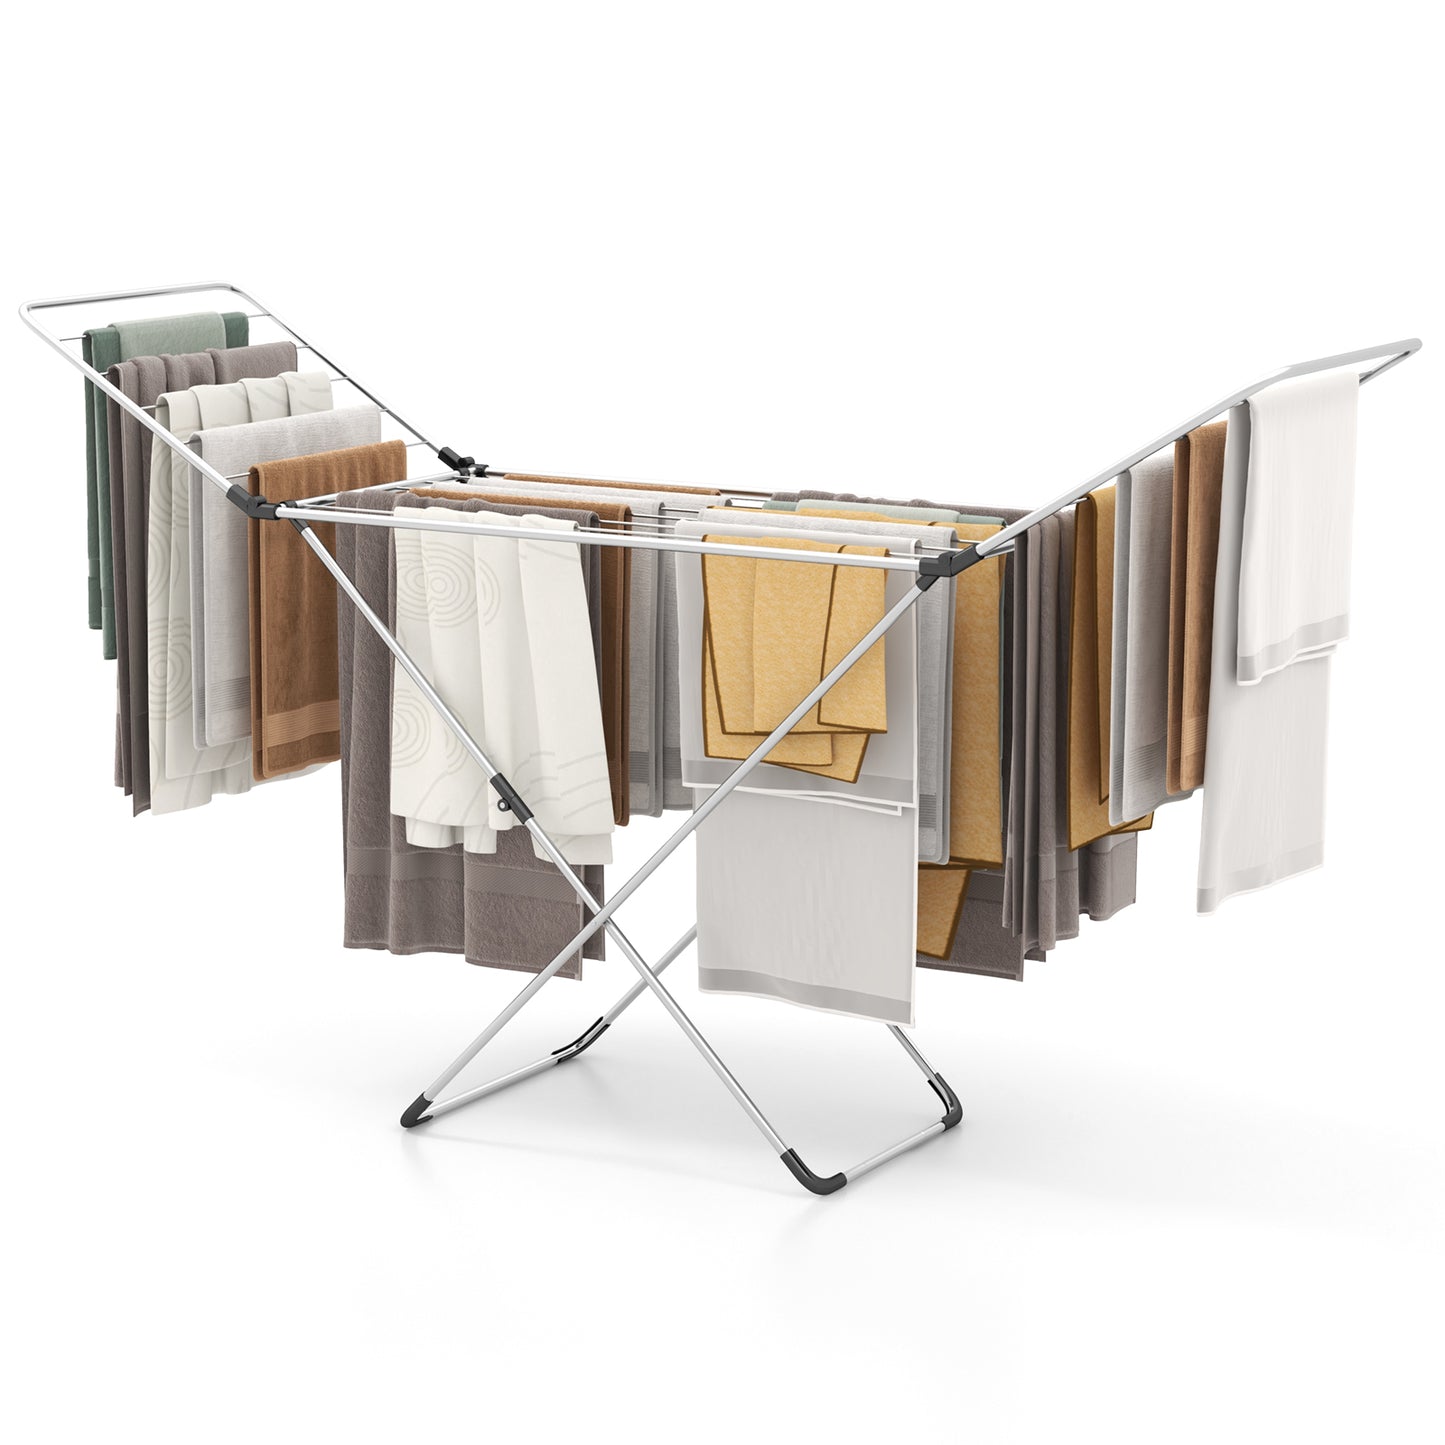 Folding Clothes Drying Rack with Adjustable Wings for Indoor and Outdoor Use